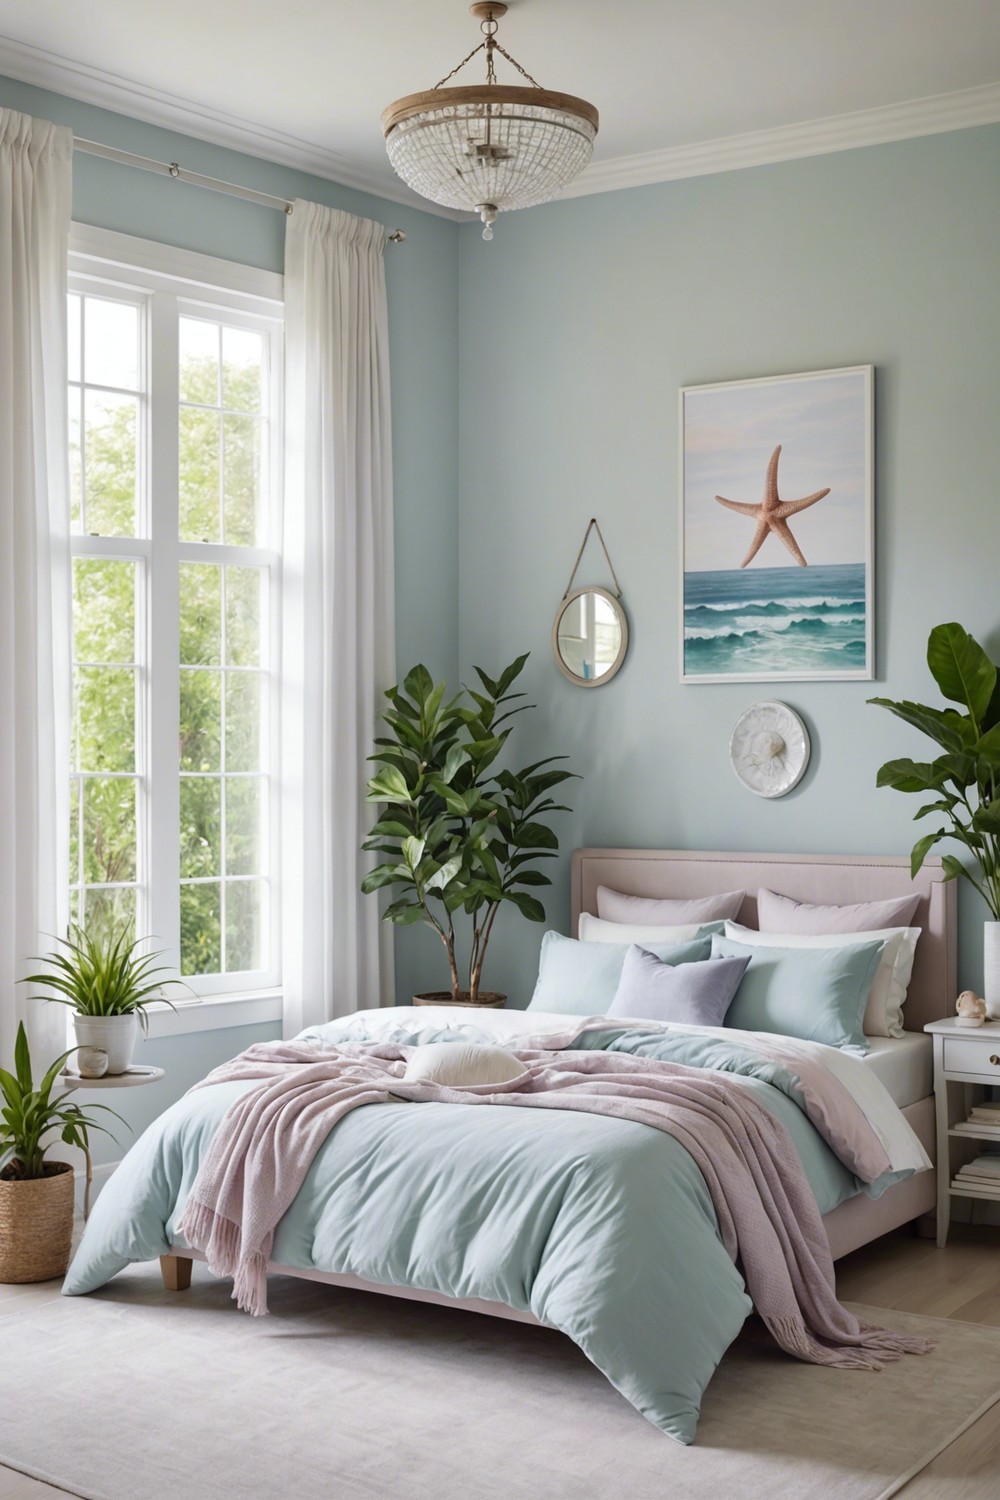 Incorporate Icy Pastels for a Cool Vibe